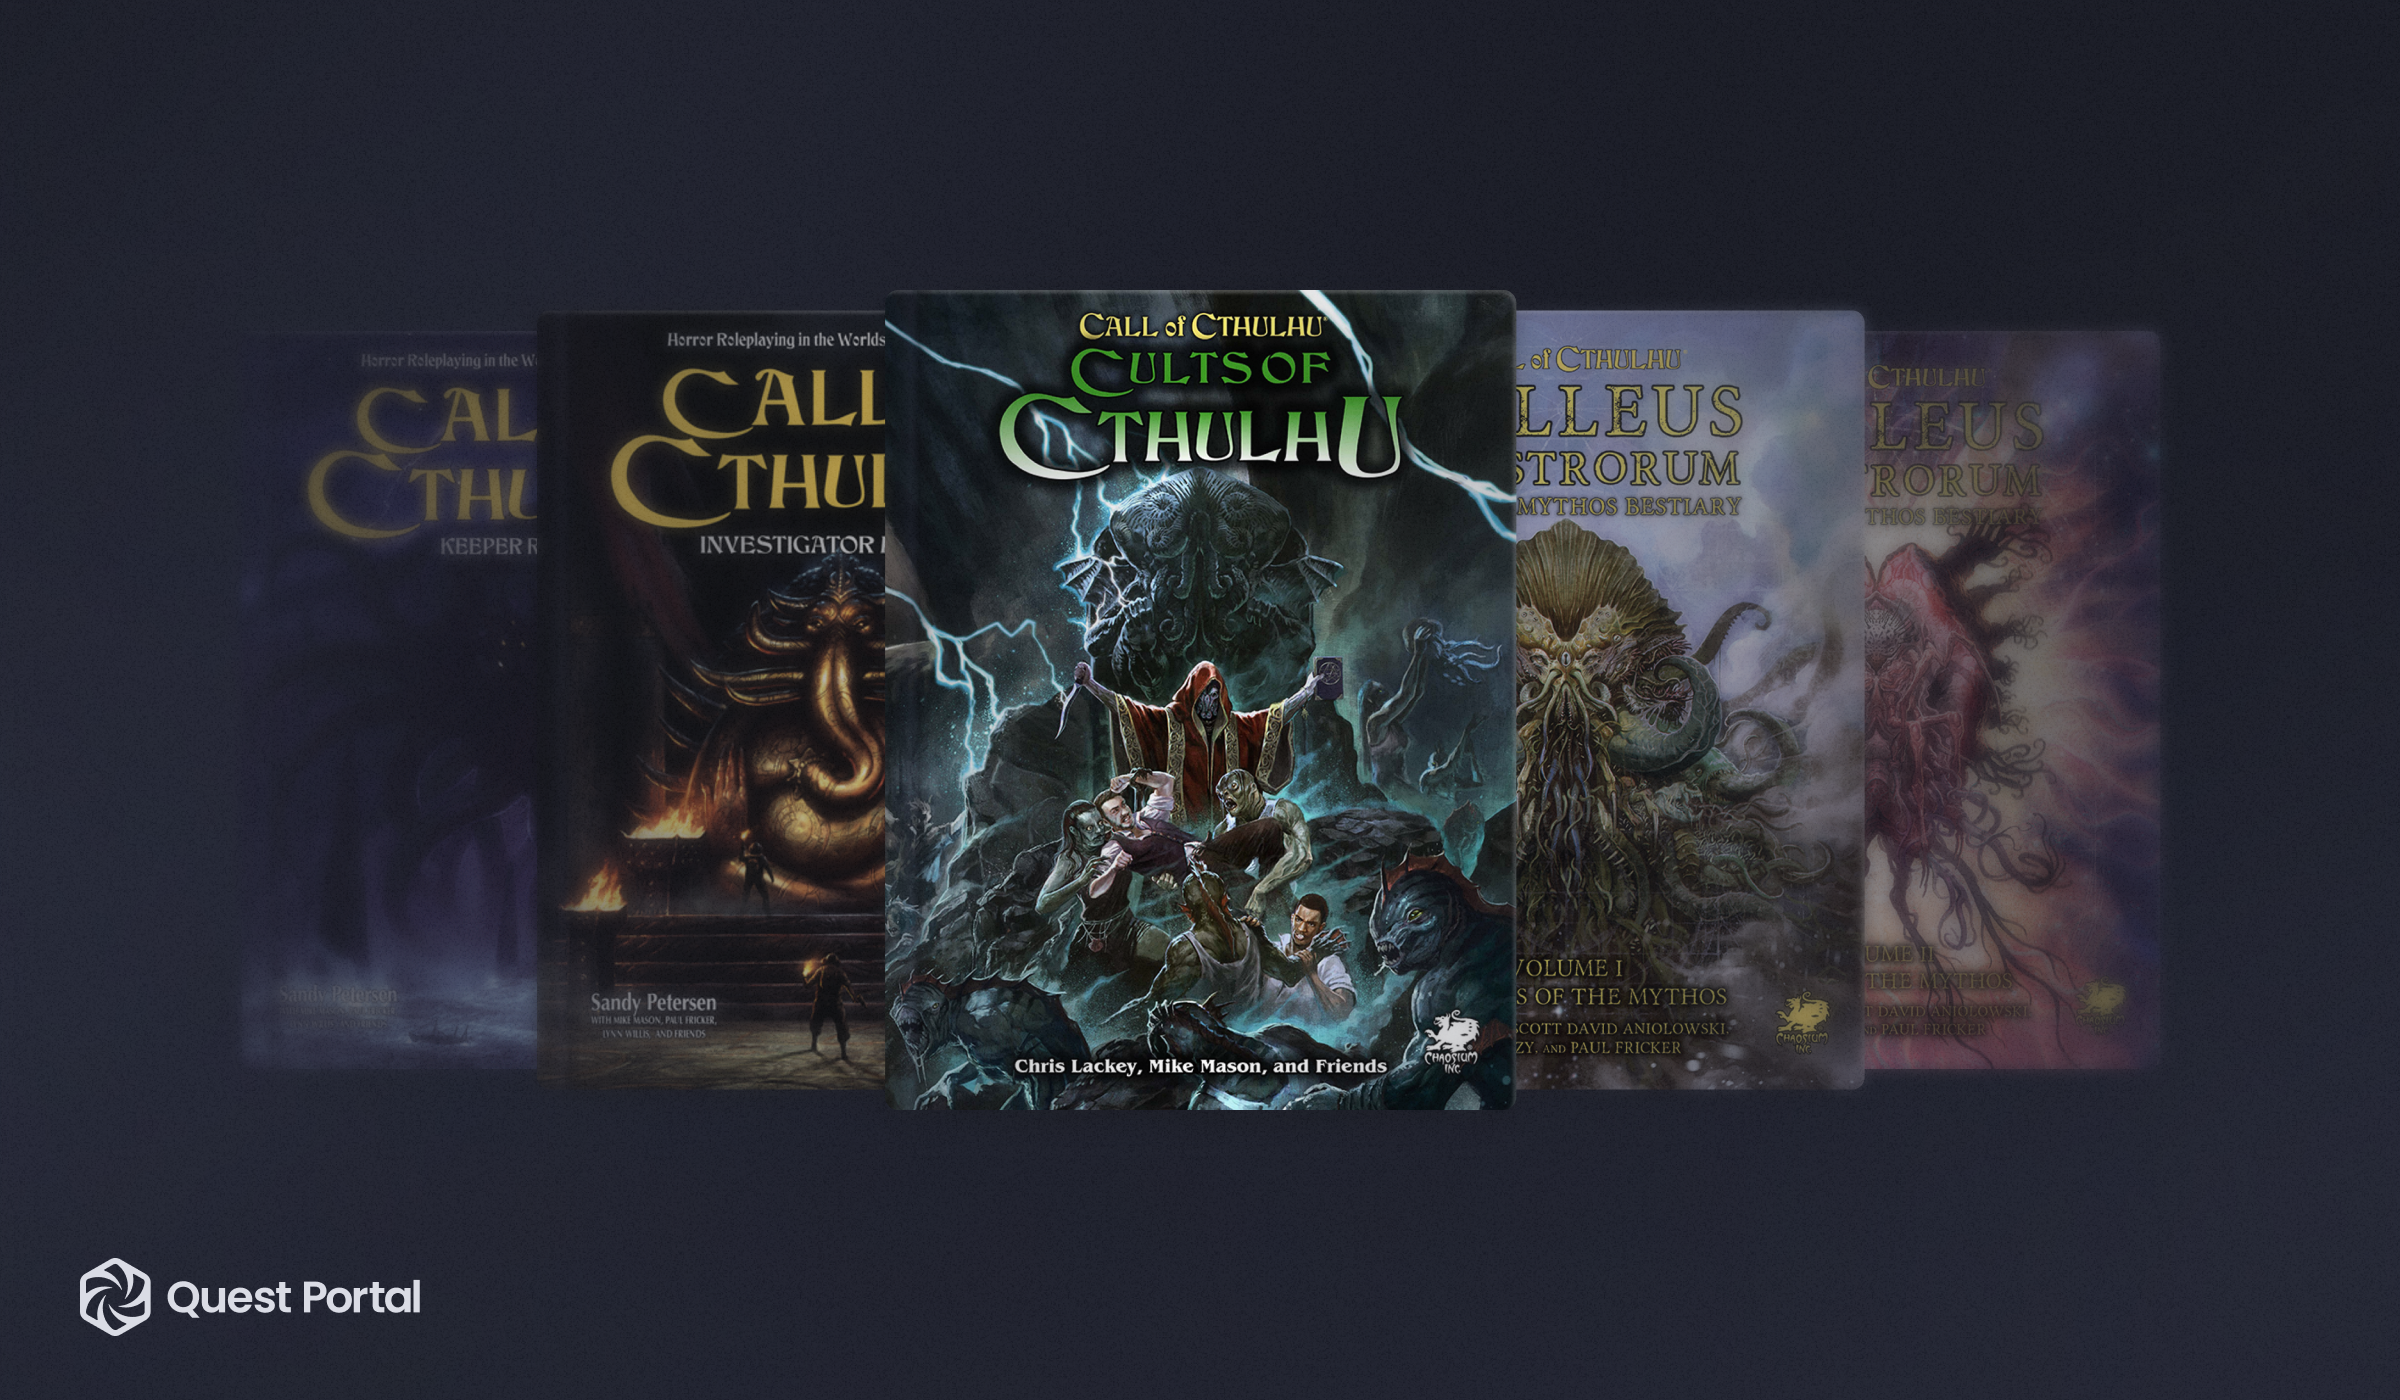 Image of the books offer in Chaosium Core